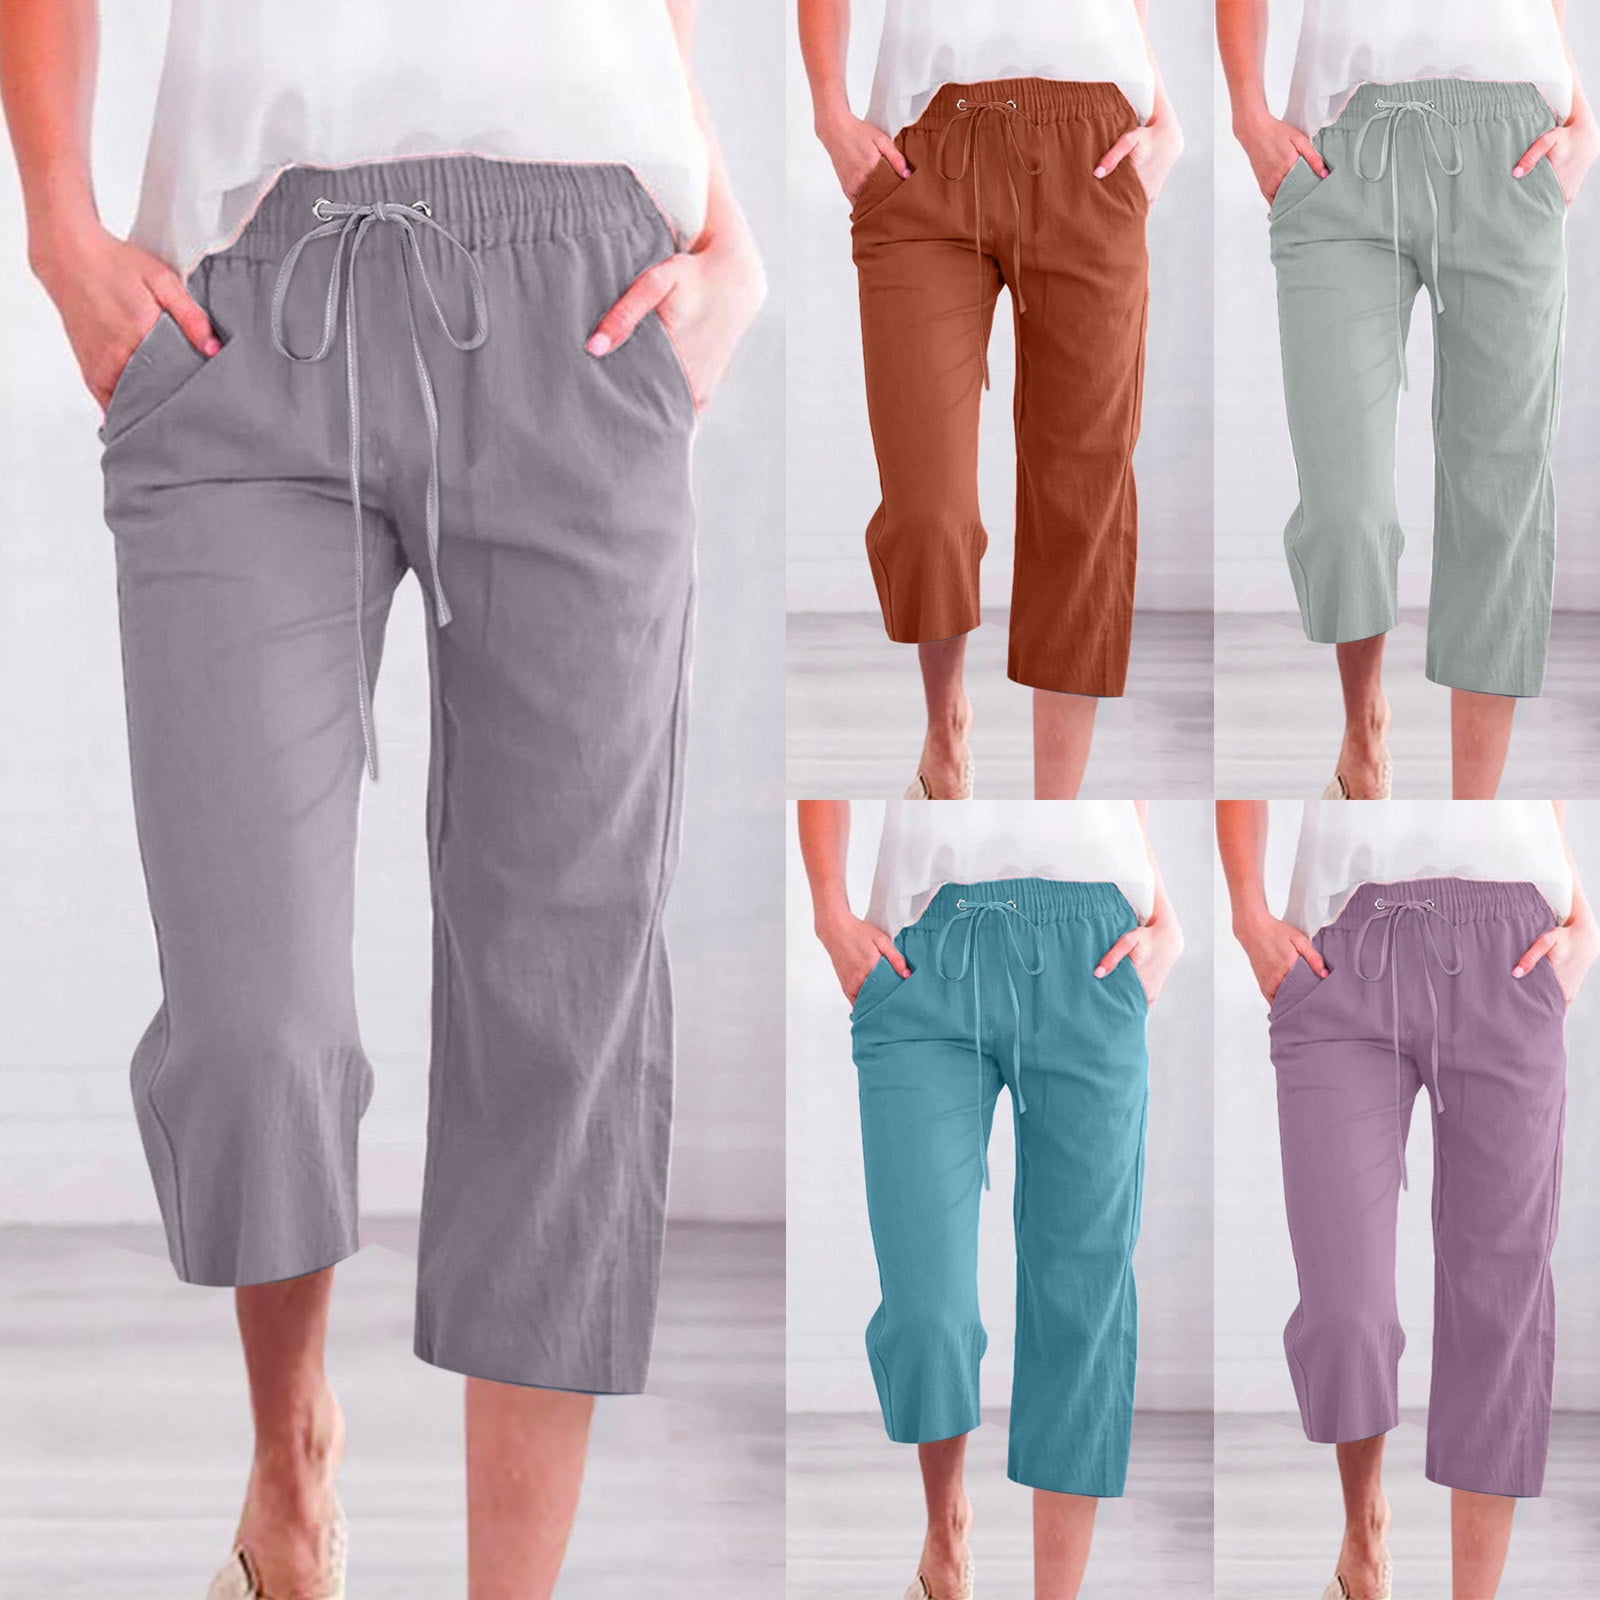 symoid Cotton Linen Capris Pants for Women- Casual Solid with Pockets ...